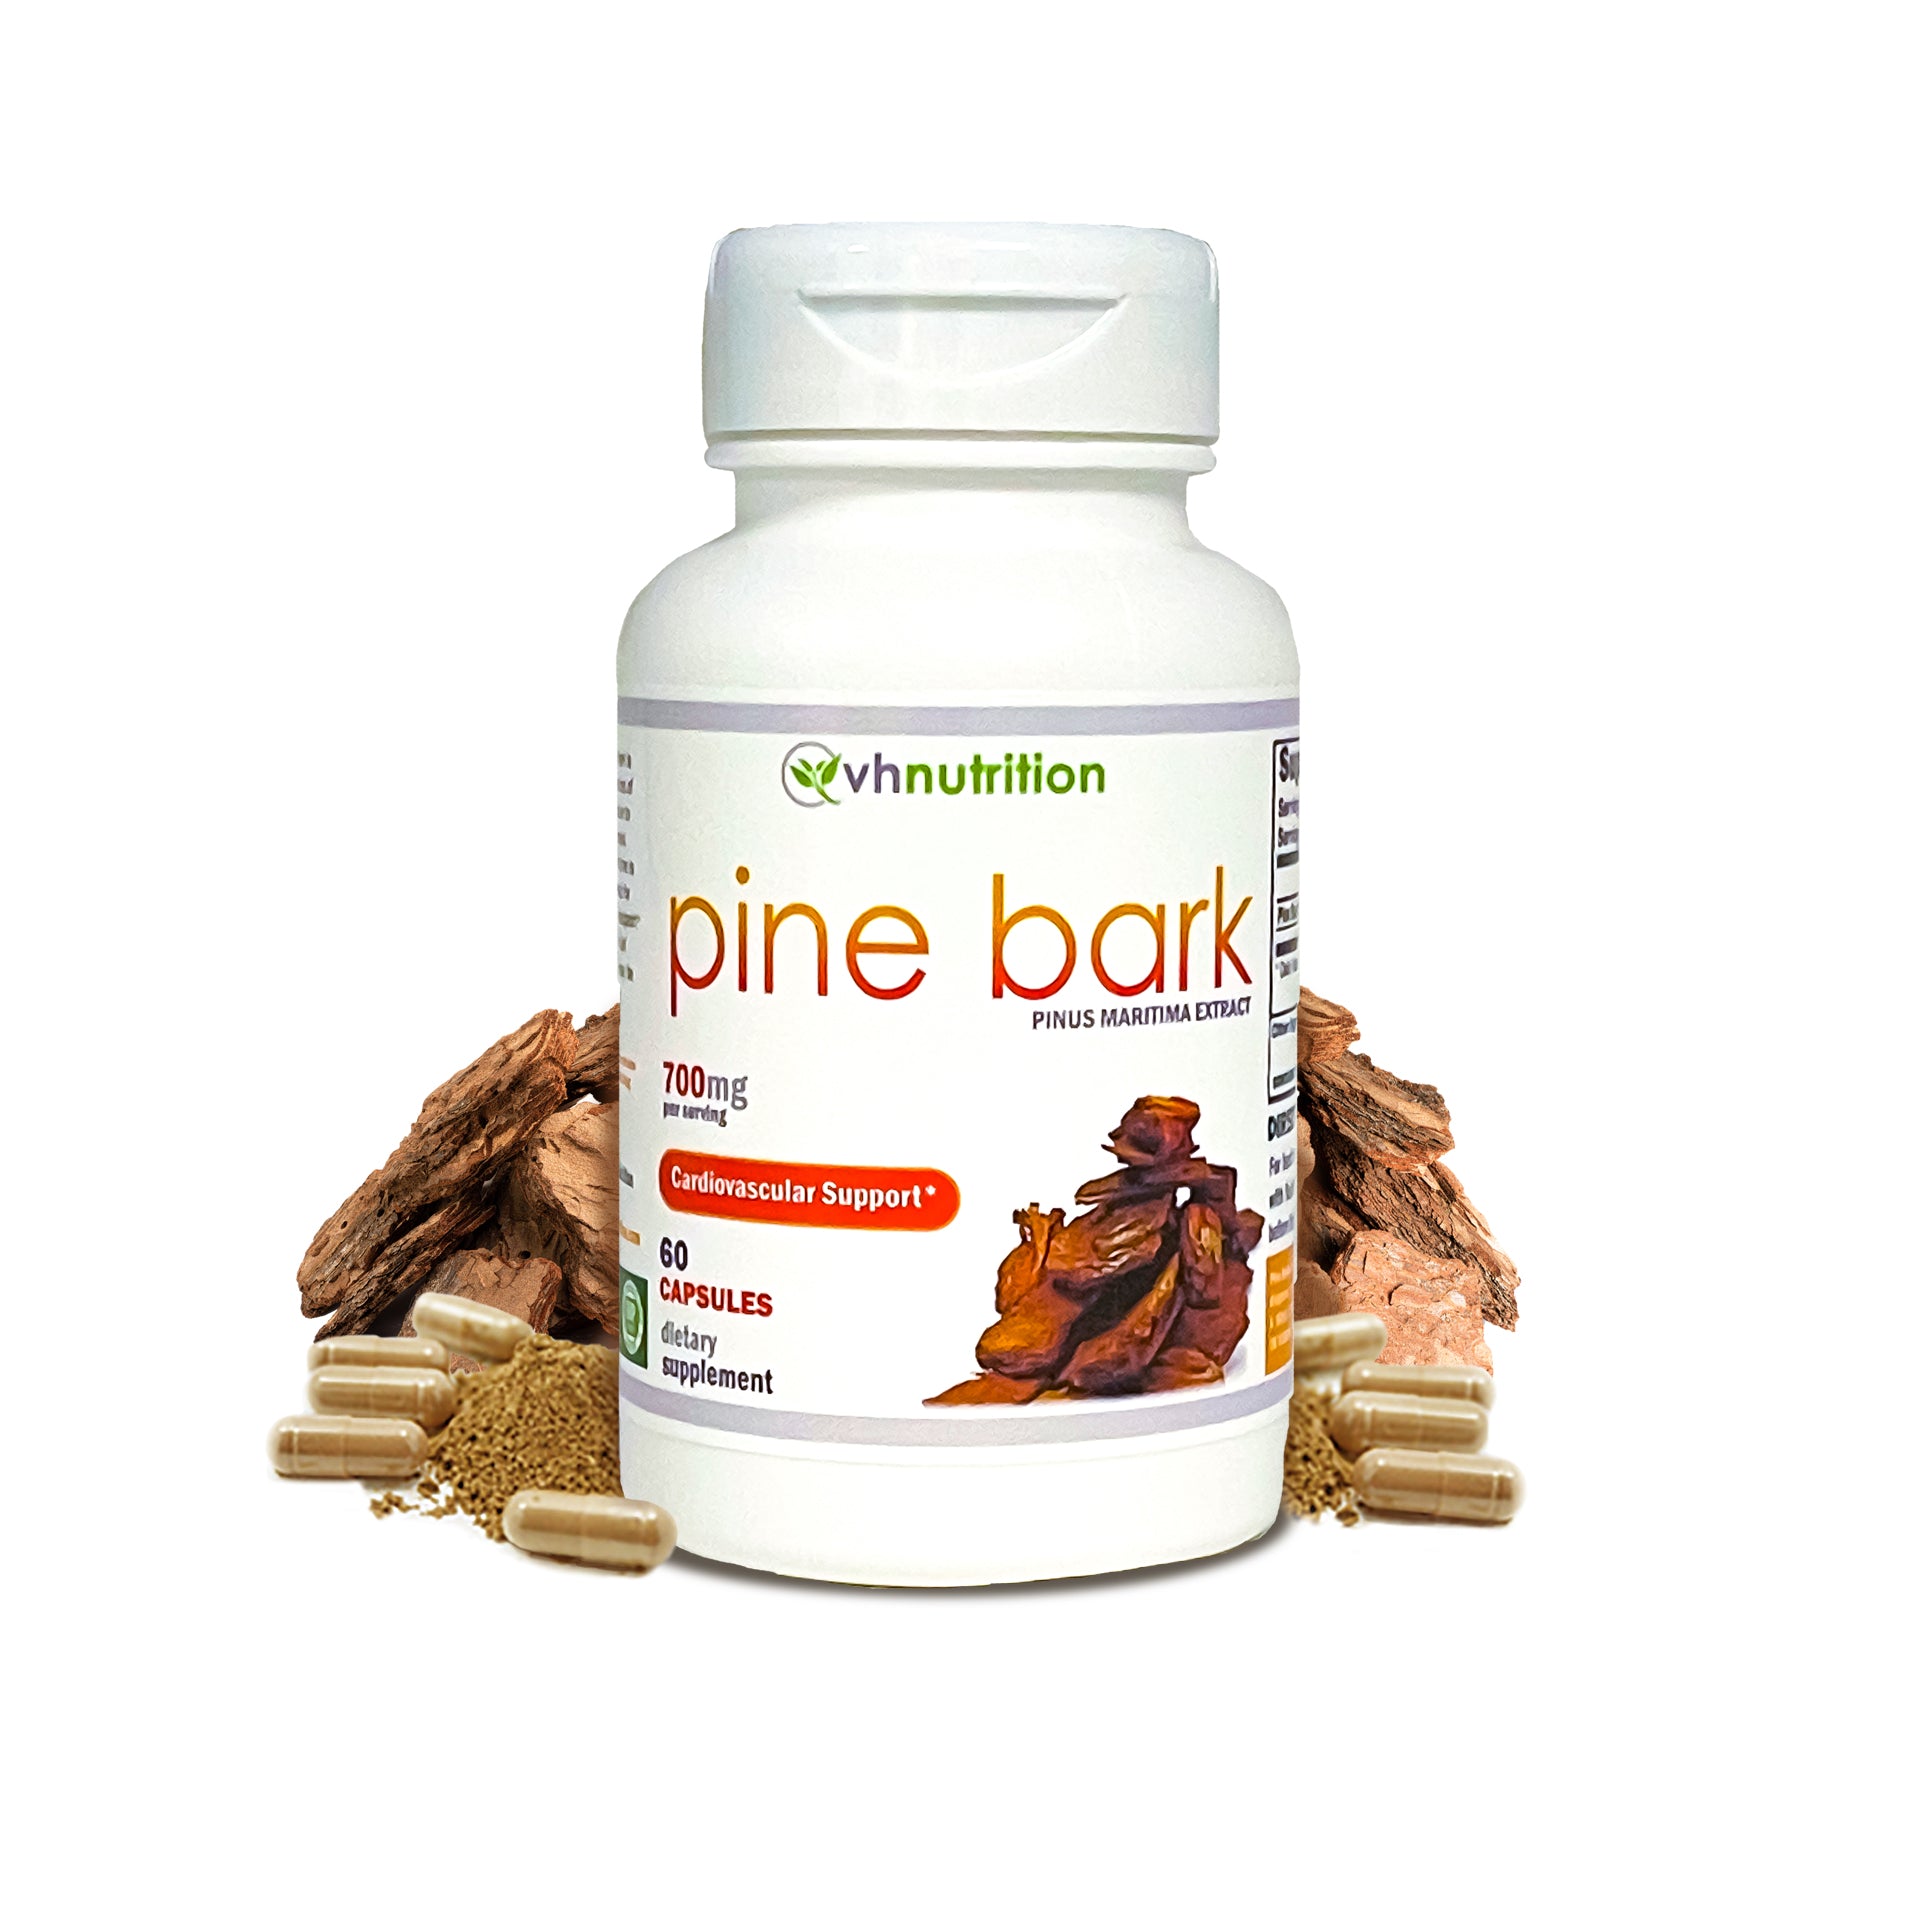 VH Nutrition PINE BARK | Cardiovascular Support Supplement* | 700mg Per Serving | Standardized Pinus maritima Extract Powder | 60 Capsules